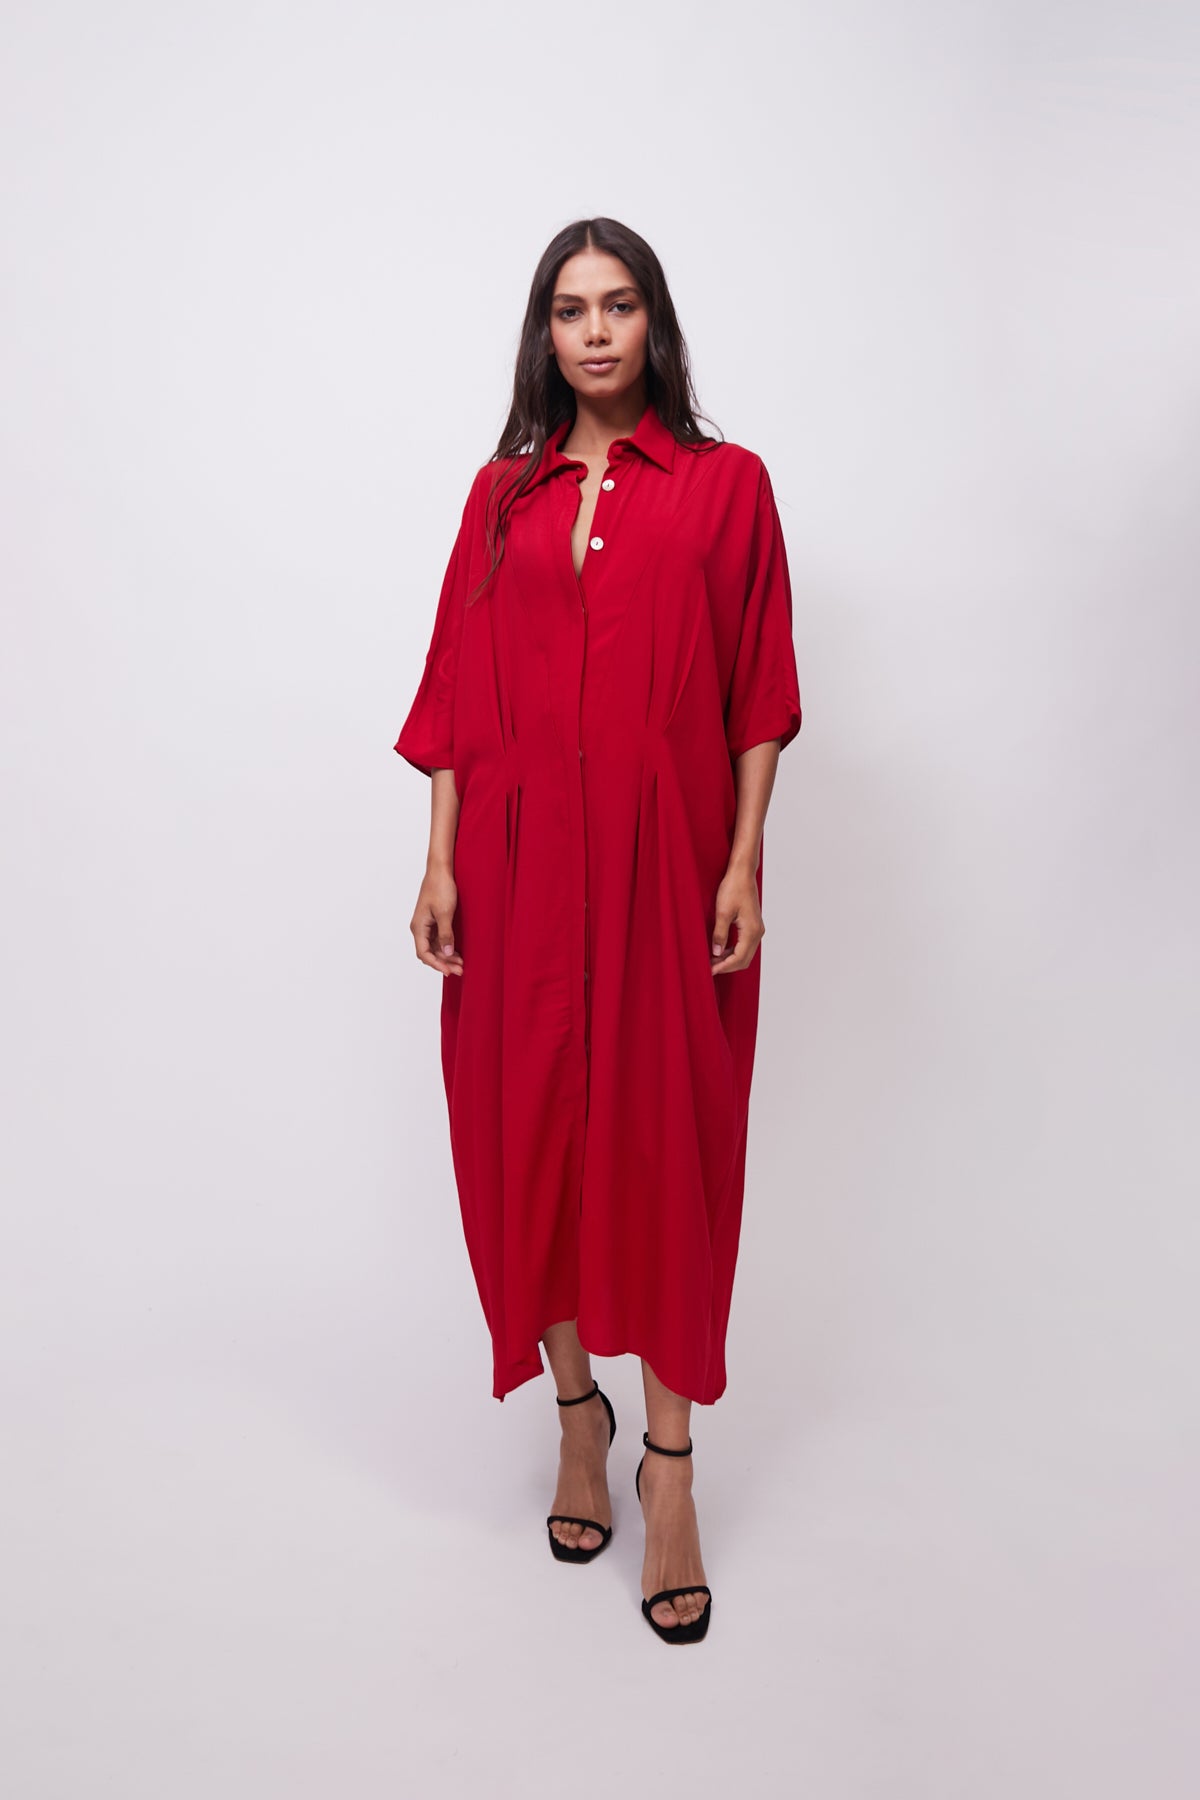 Clementina Red Dress